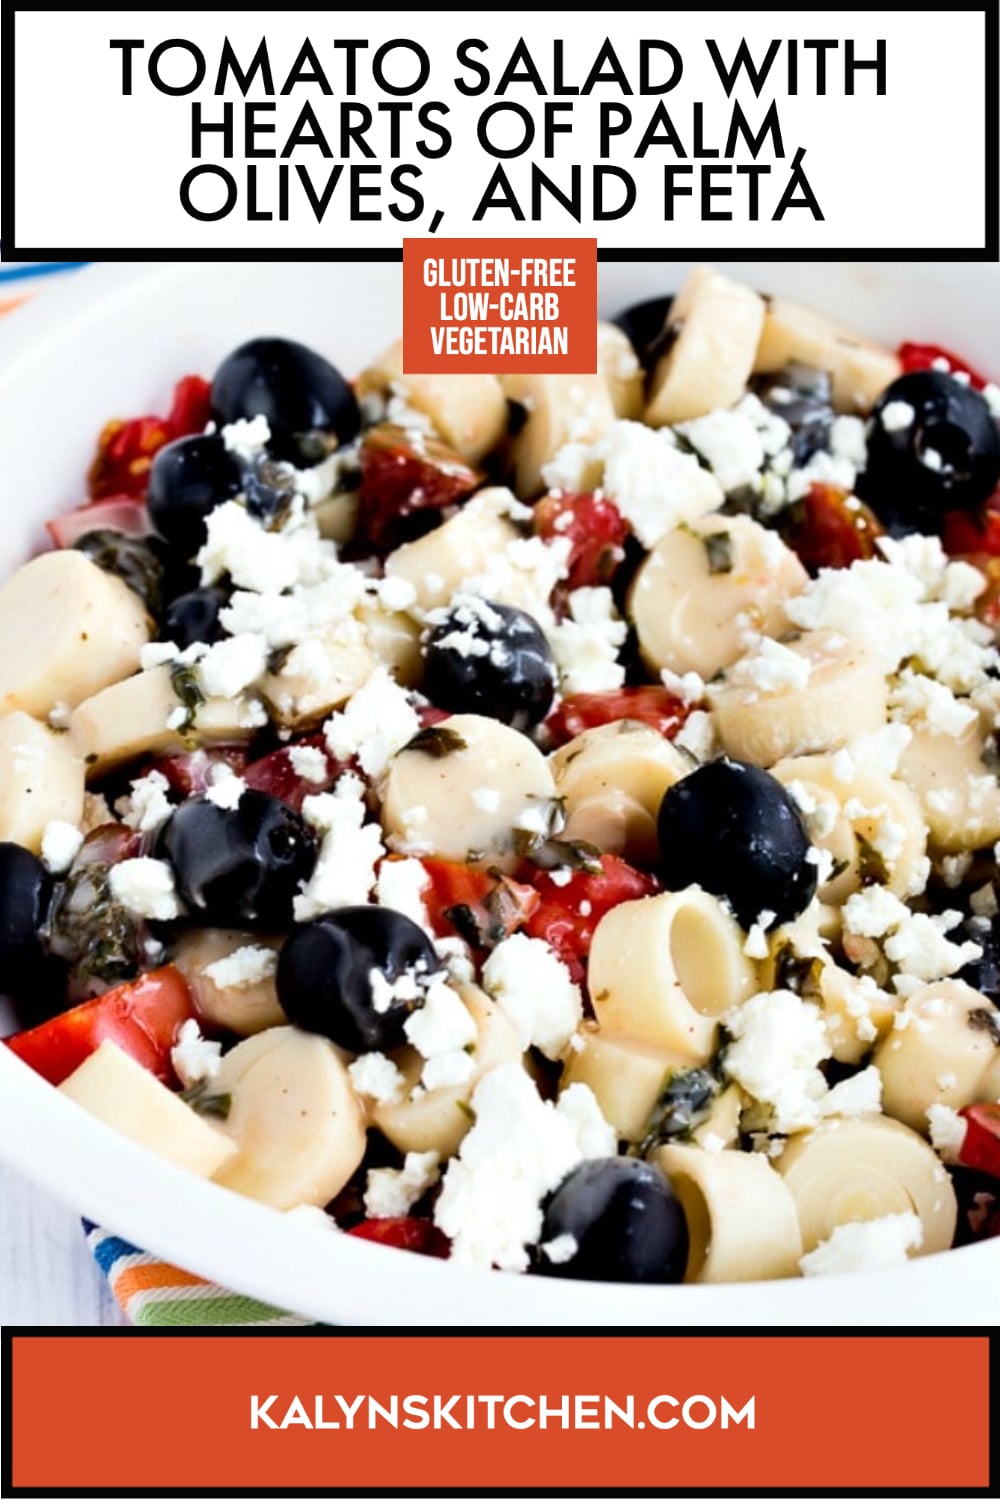 Pinterest image of Tomato Salad with Hearts of Palm, Olives, and Feta